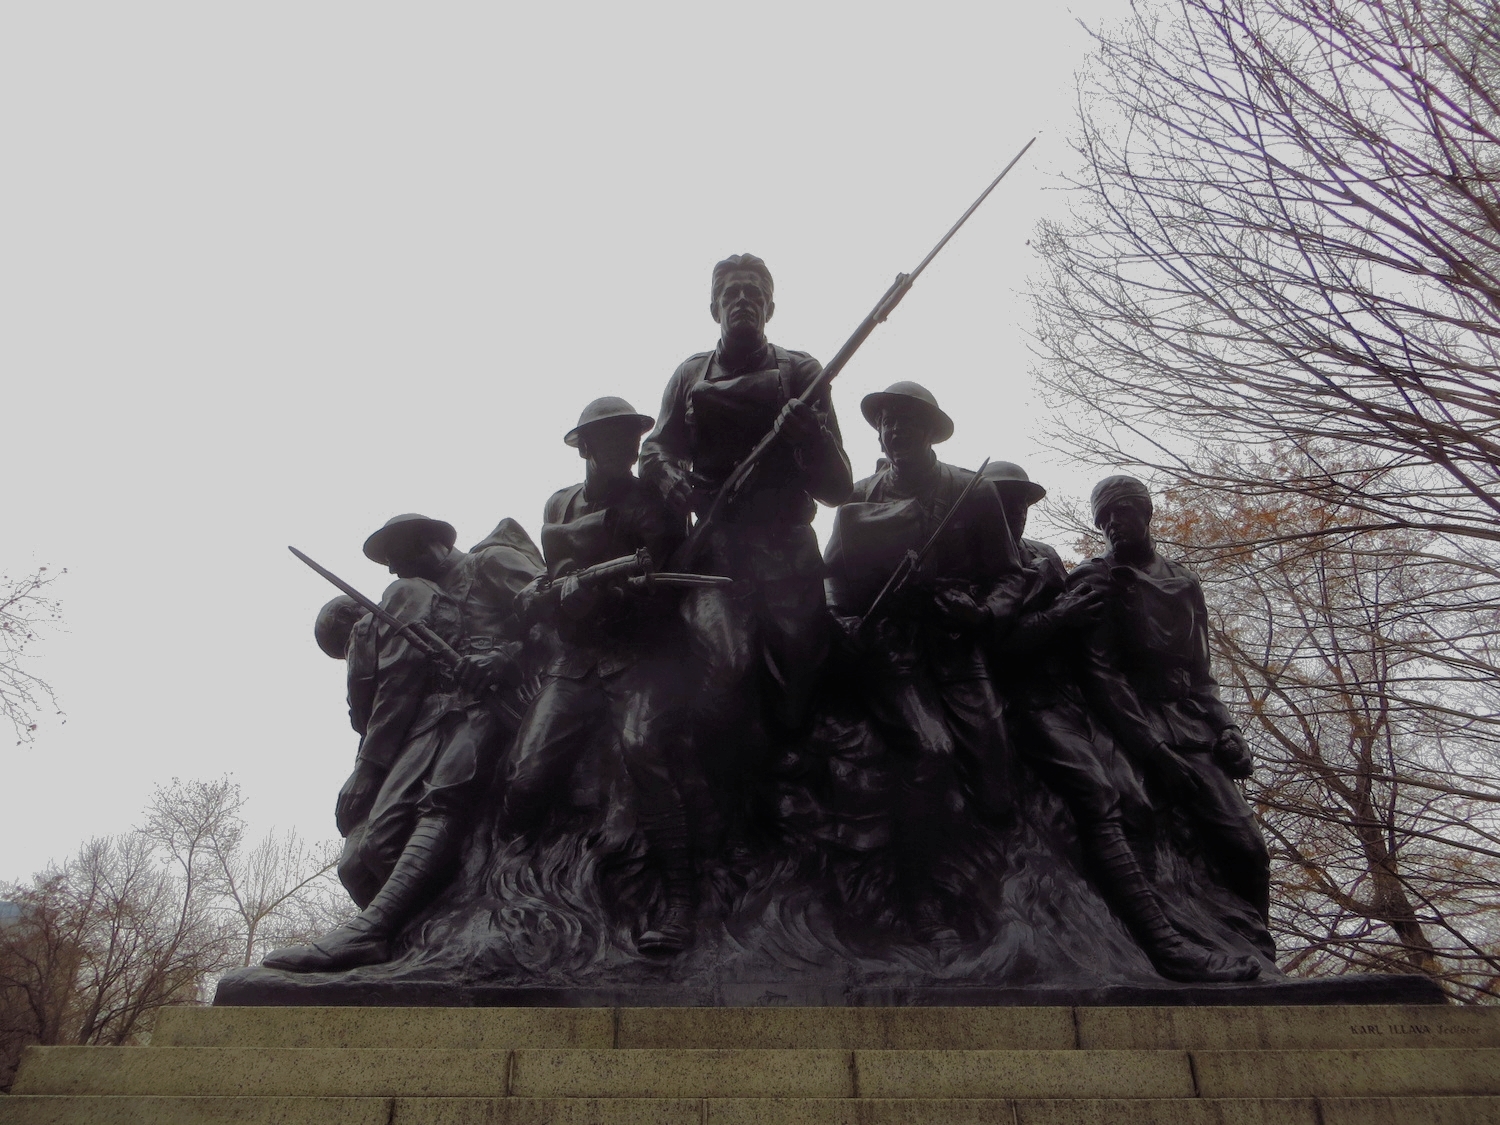 107th Infantry Memorial (WWI)